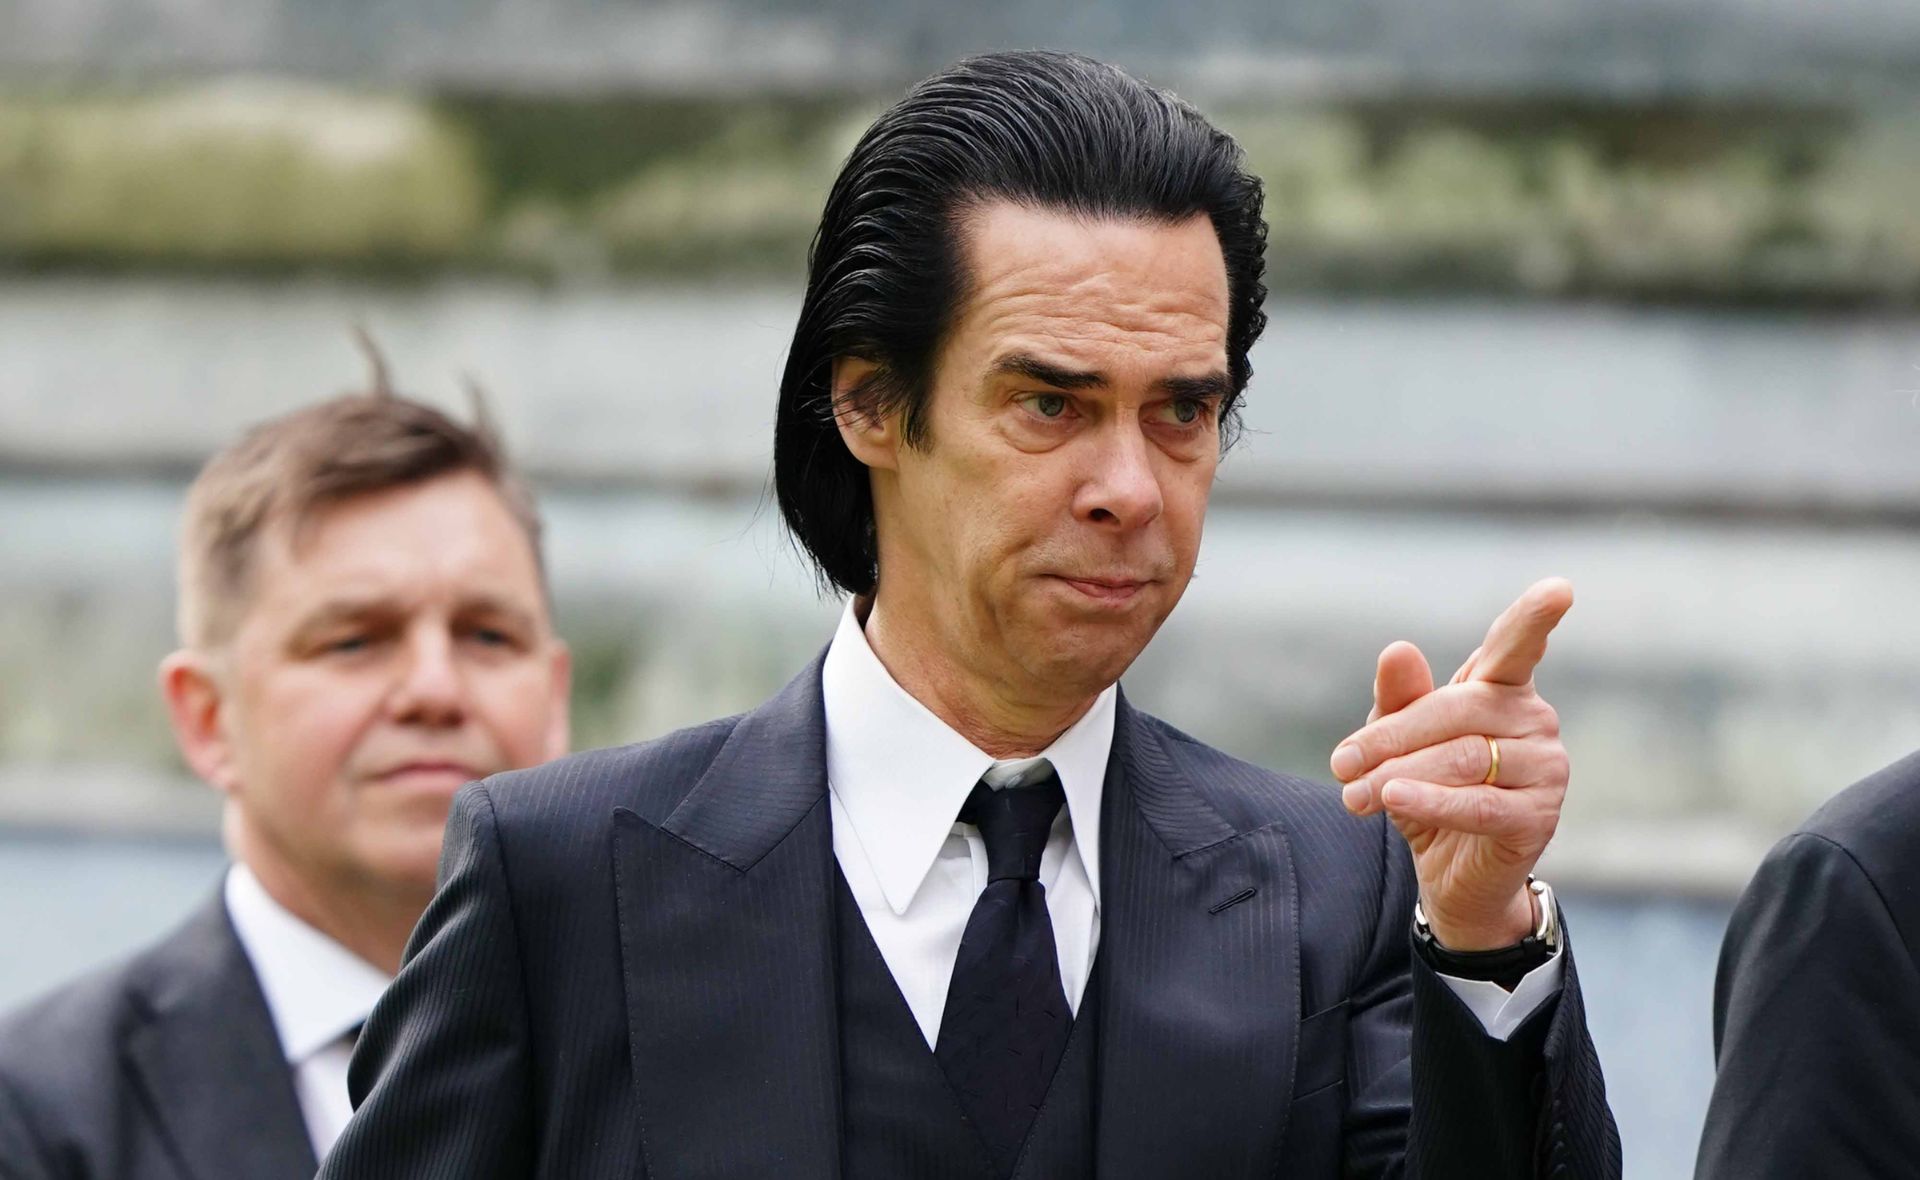 Aussie rocker Nick Cave says he had no choice but to “accept” coronation invitation